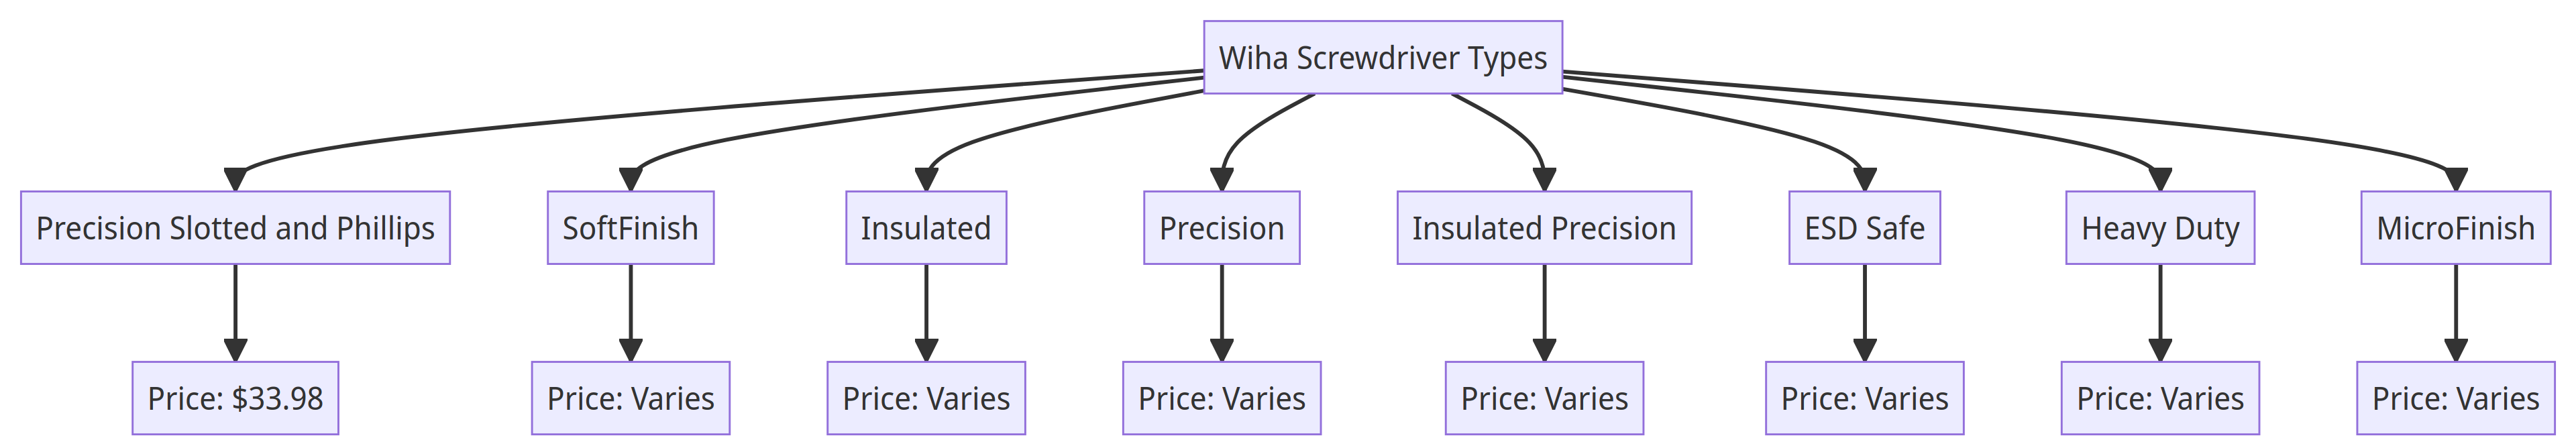 Flow Chart of Wiha Screwdriver Types and Prices